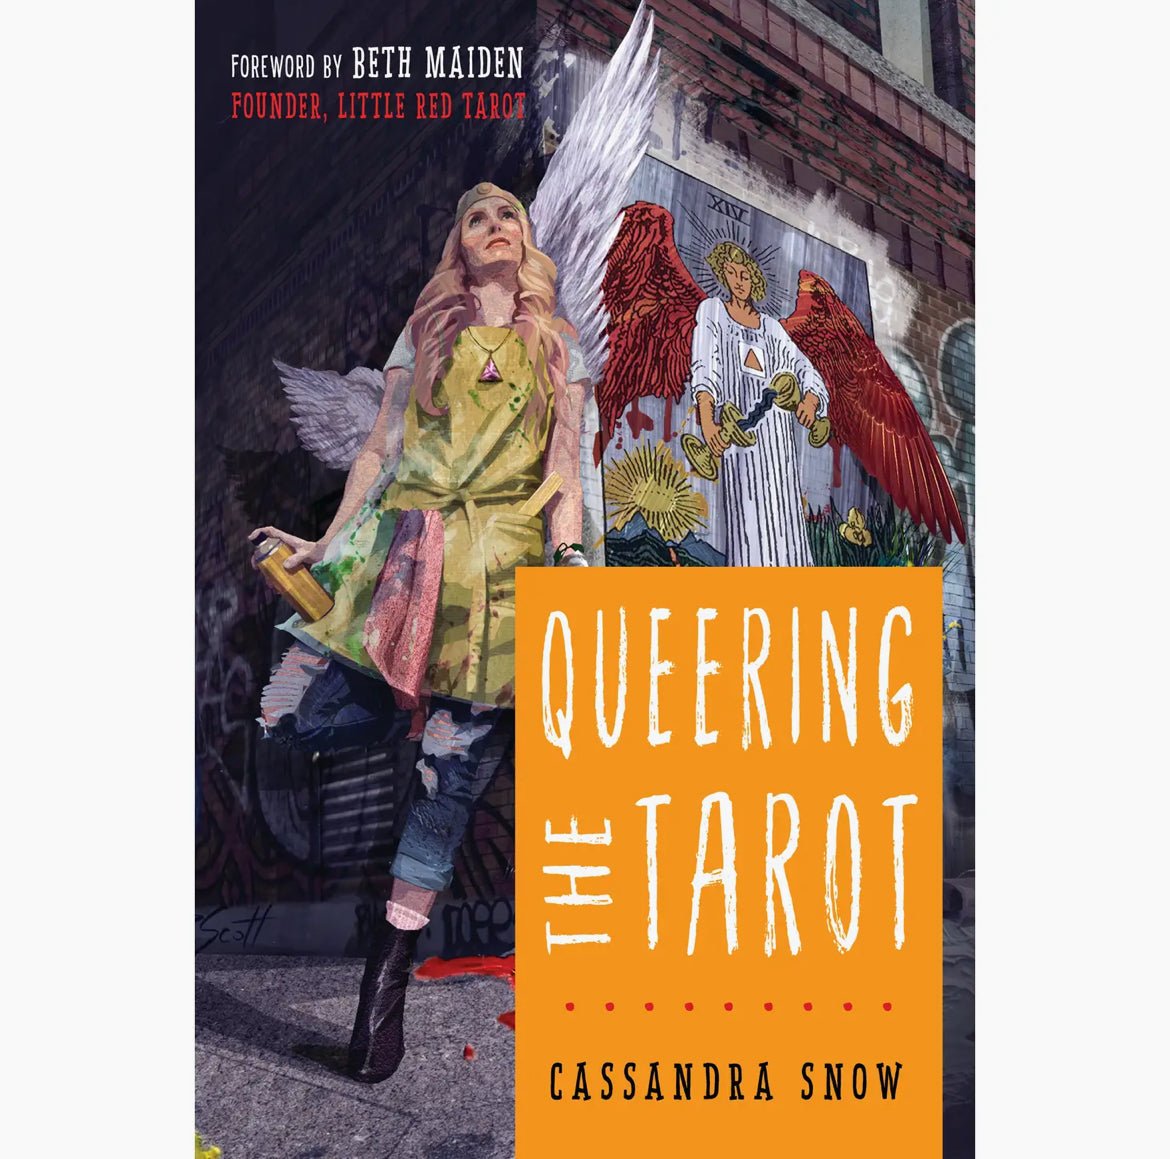 ‘Queering the Tarot’ - EcoLuxe Furnishings